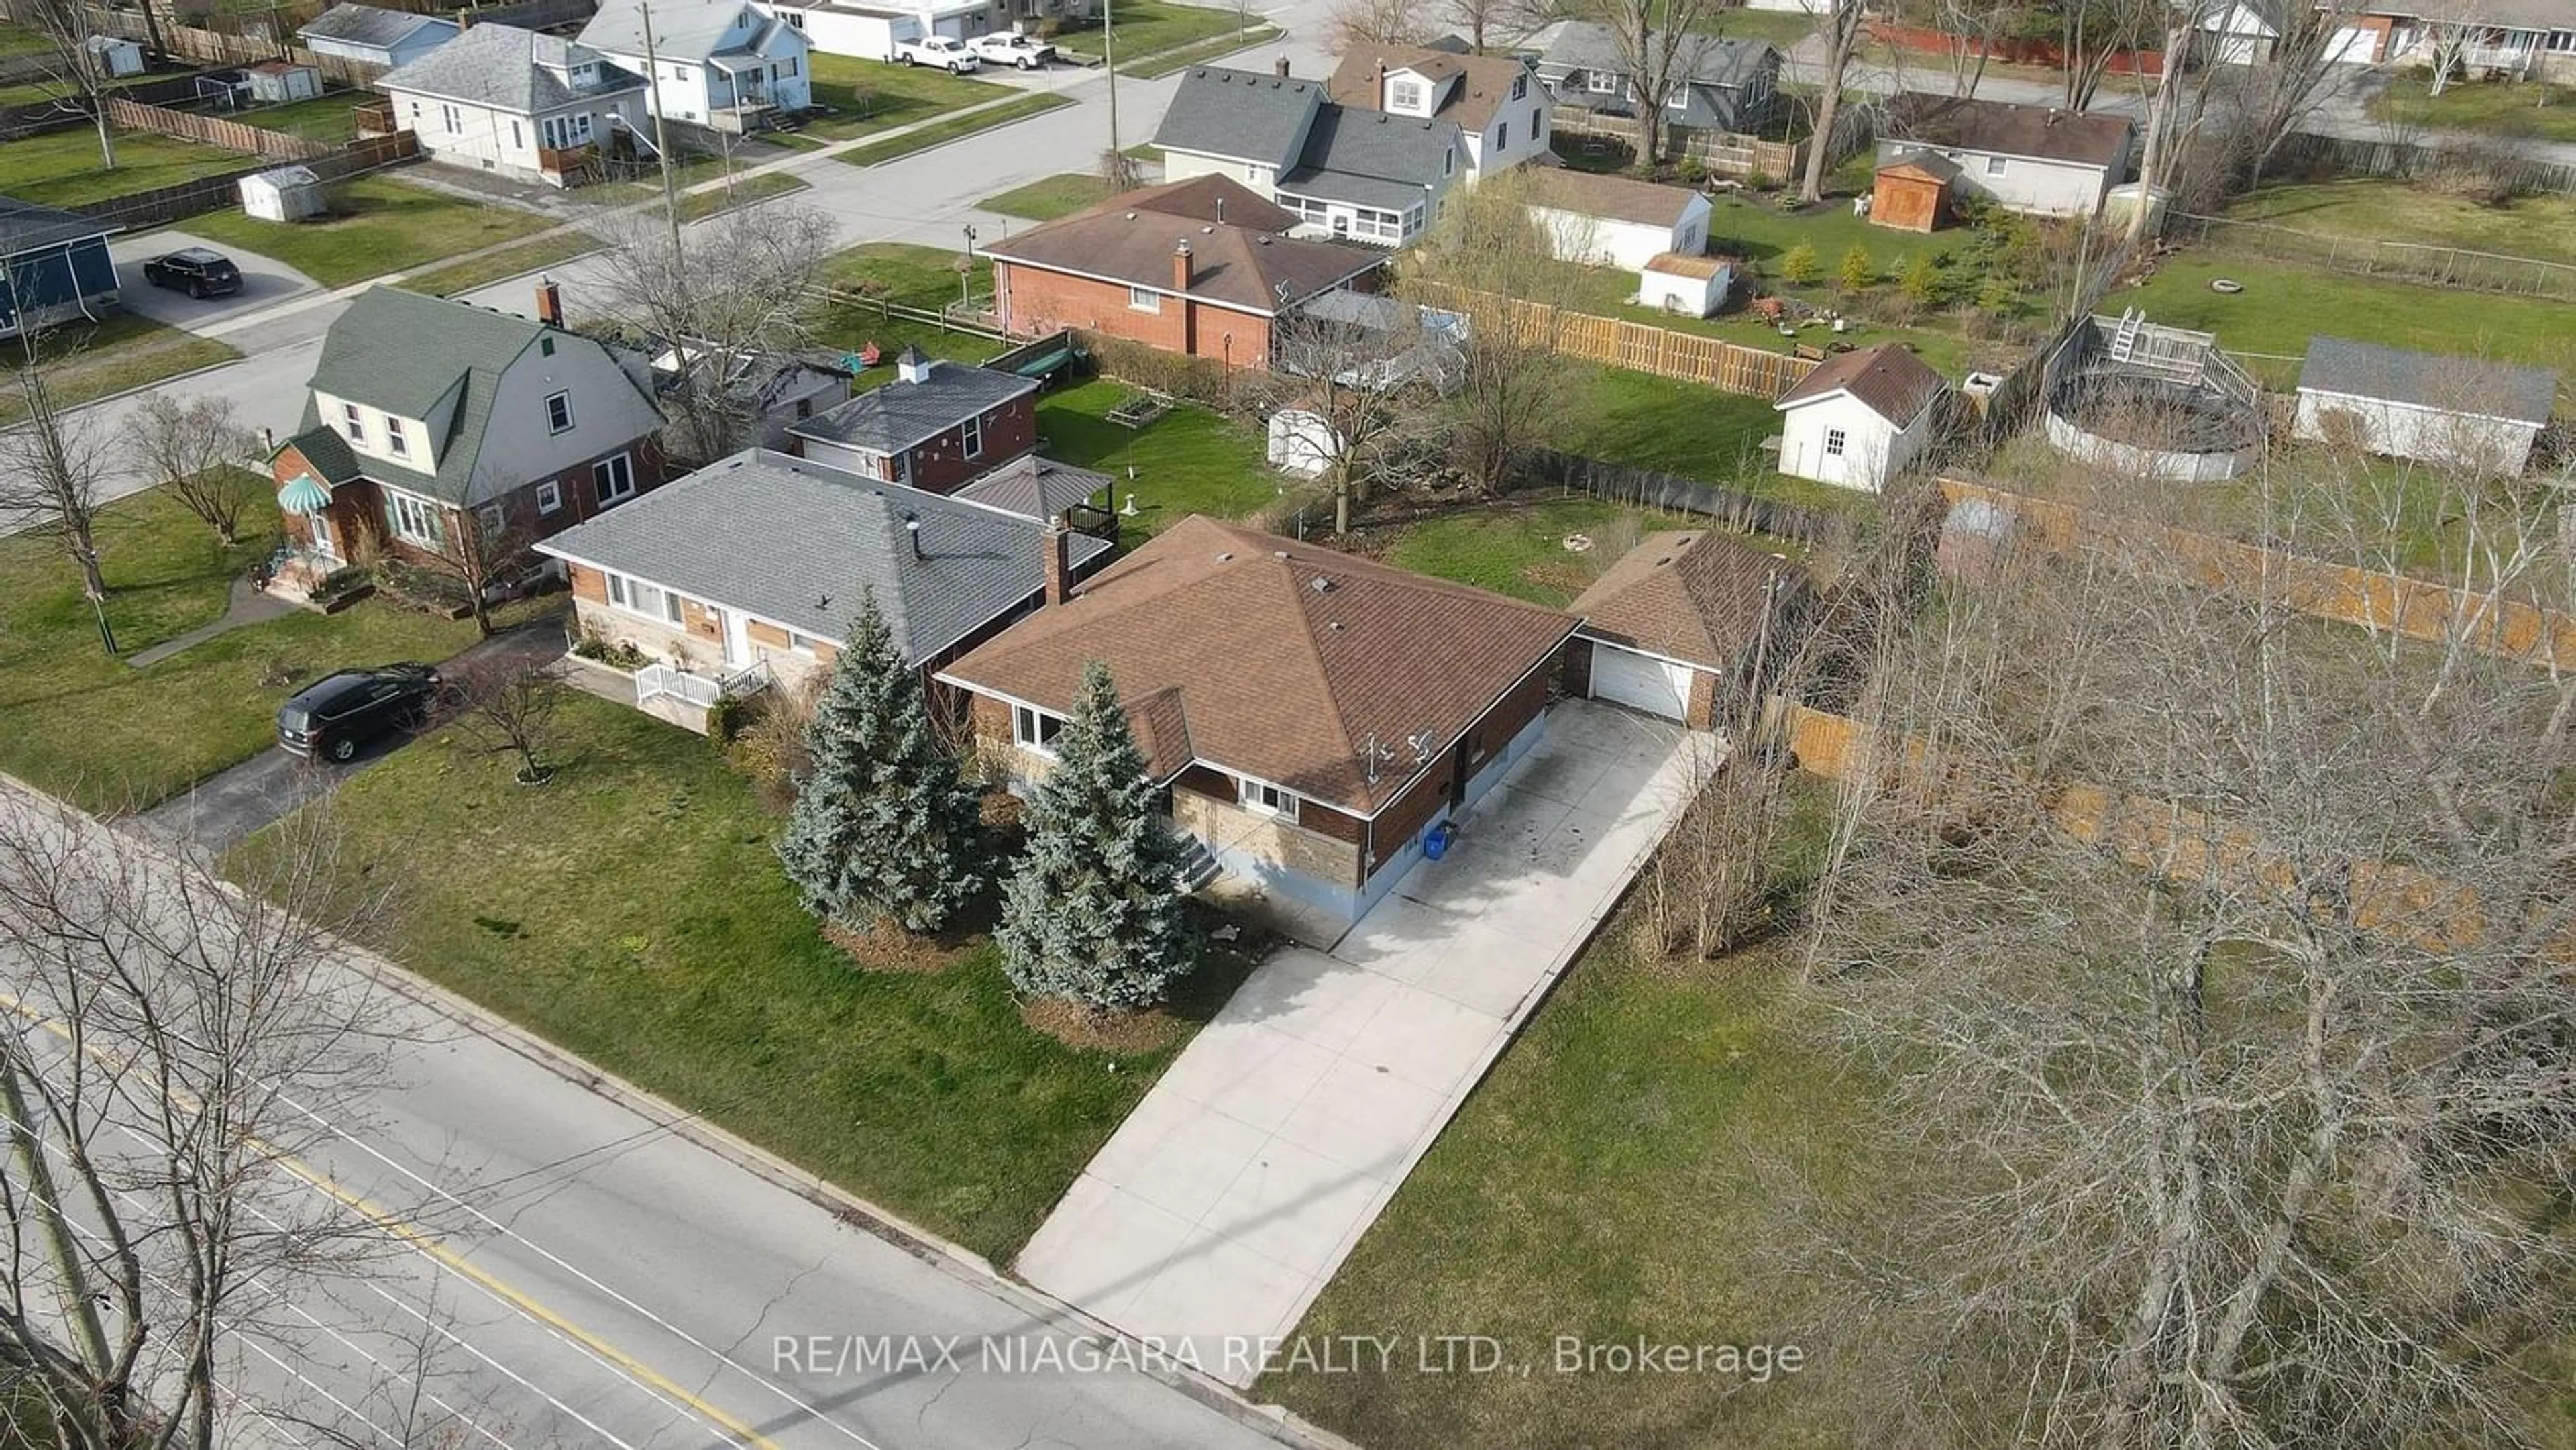 Frontside or backside of a home for 219 Central Ave, Fort Erie Ontario L2A 3S9